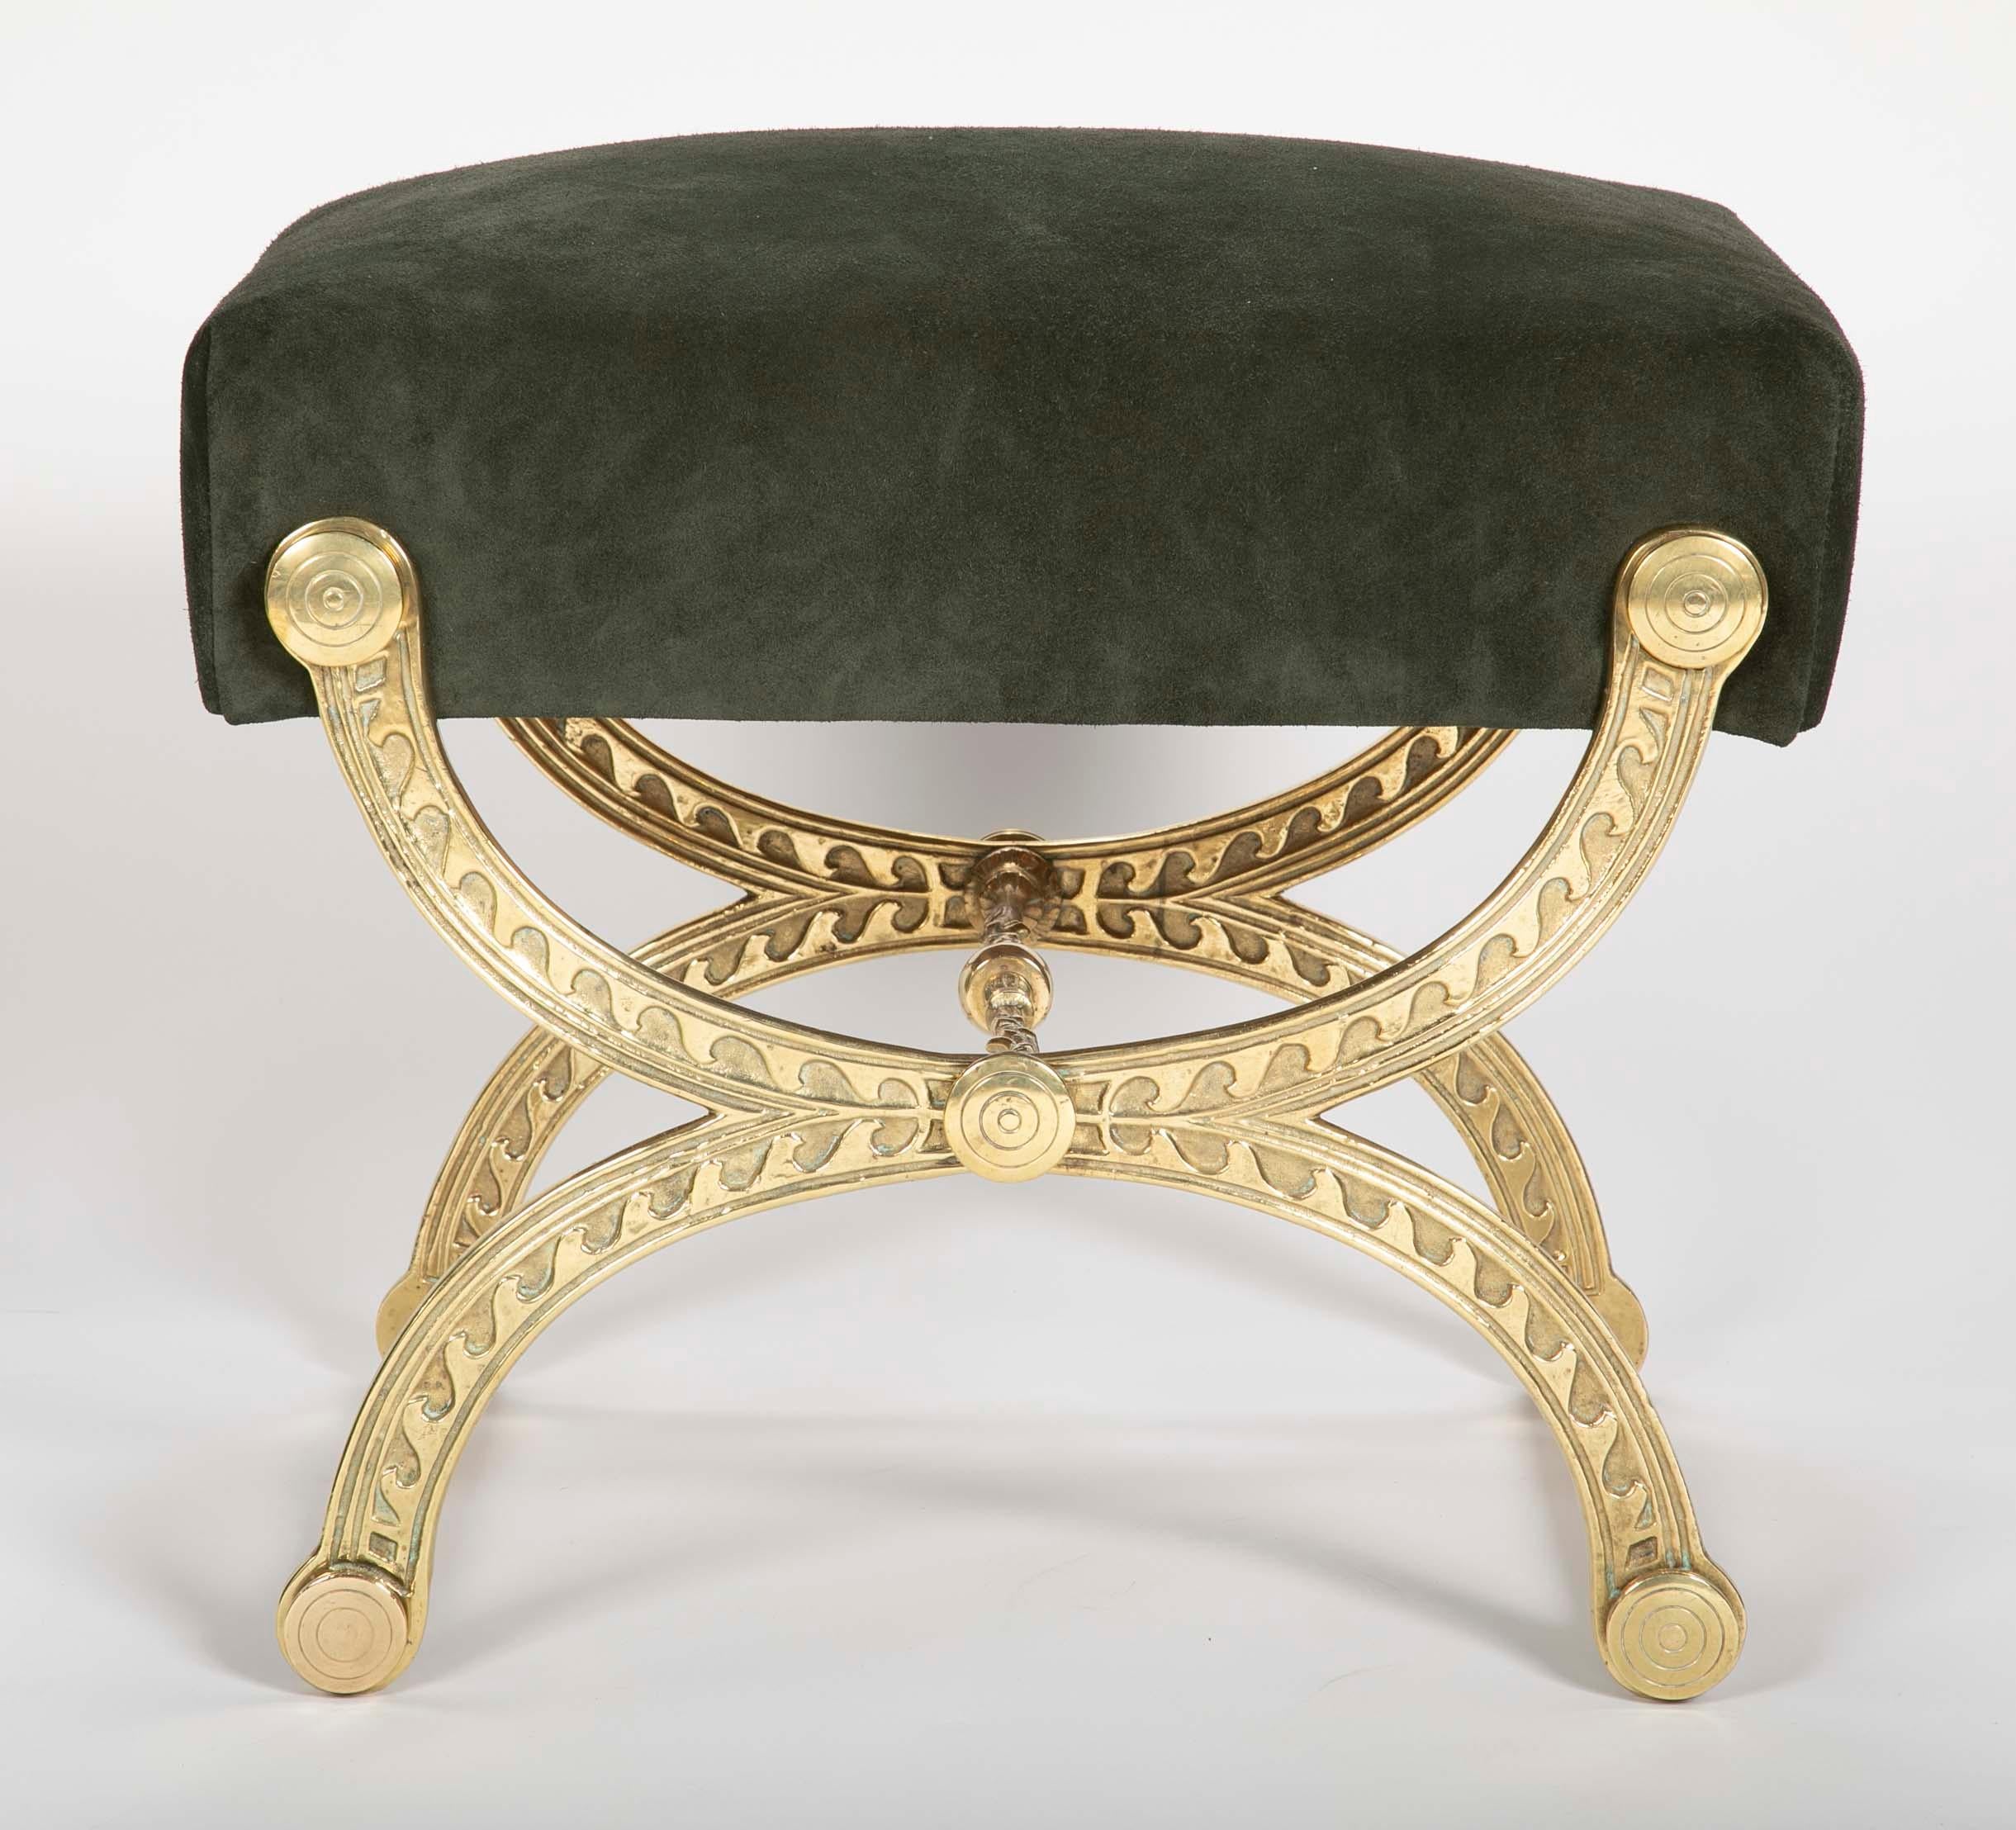 American Brass and Suede Curule Form Neoclassical Style Stool with Vitruvian Wave Motif